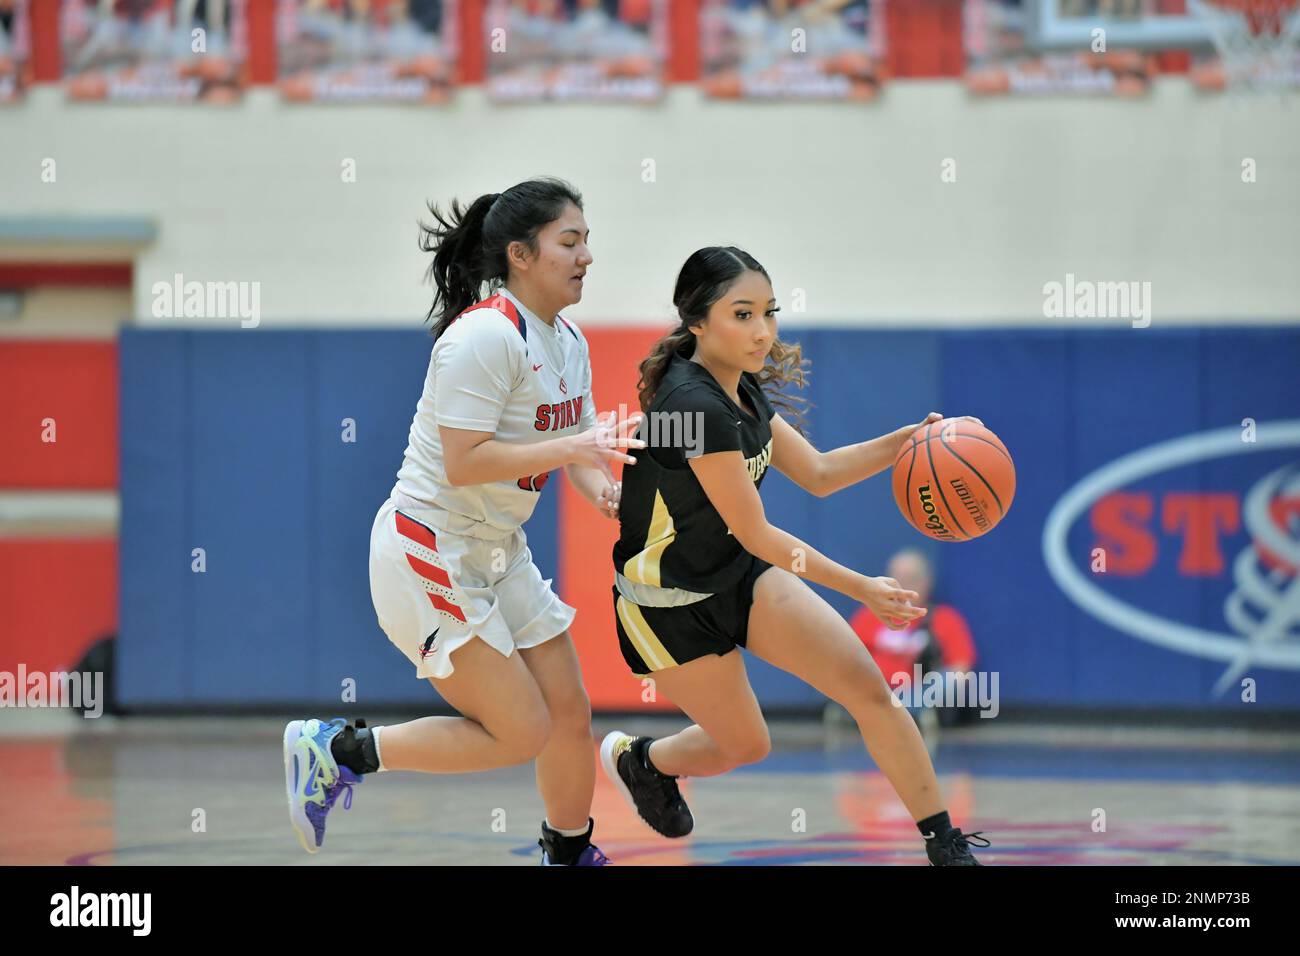 USA. Player attempting to drive around an opponent during a high school varsity basketball game. Stock Photo